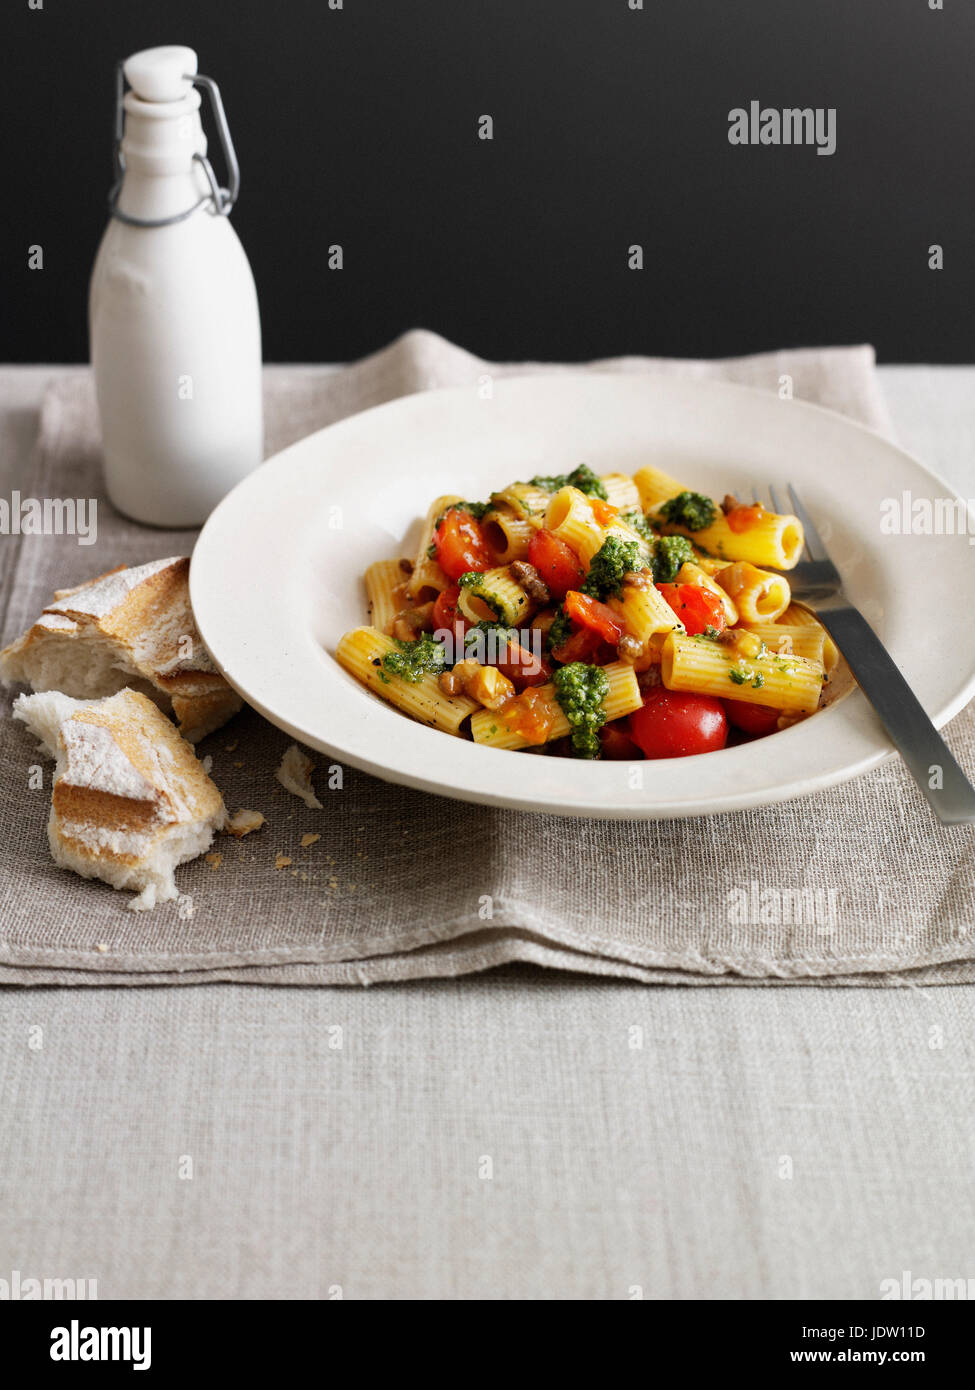 Bowl of pasta with tomatoes and bread Stock Photo